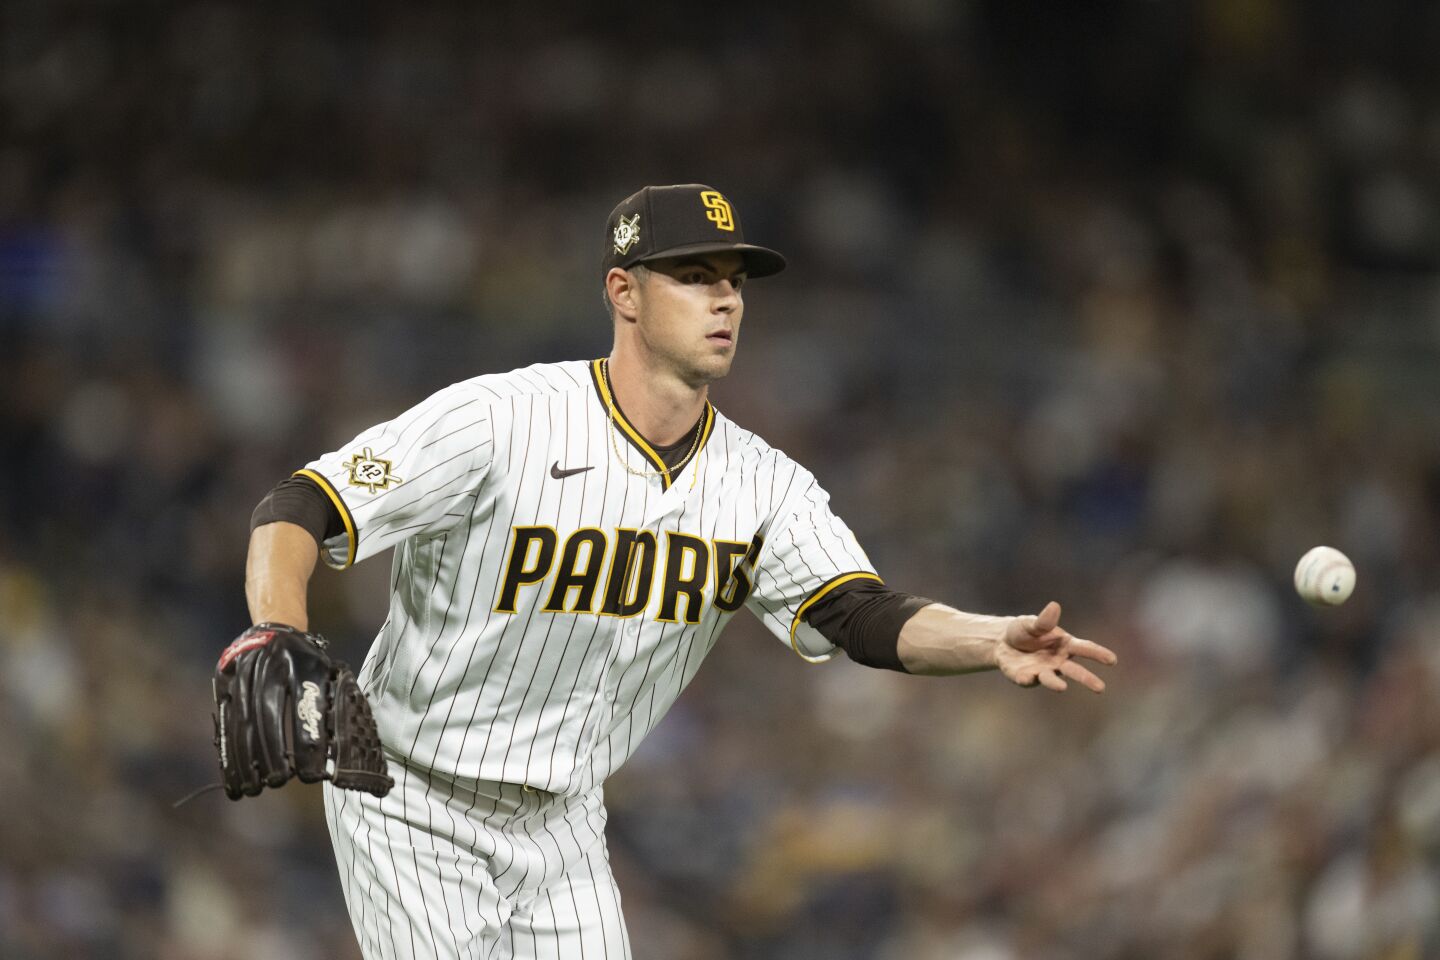 Game 3: Padres LHP MacKenzie Gore (0-0, 3.38 ERA)The 22-year-old rookie struck out three against two walks and allowed just three hits in 5 1/3 innings in his MLB debut on Friday. Gore, the organization’s top pitching prospect, struck out 16 batters in 12 innings (4.50 ERA) this spring.